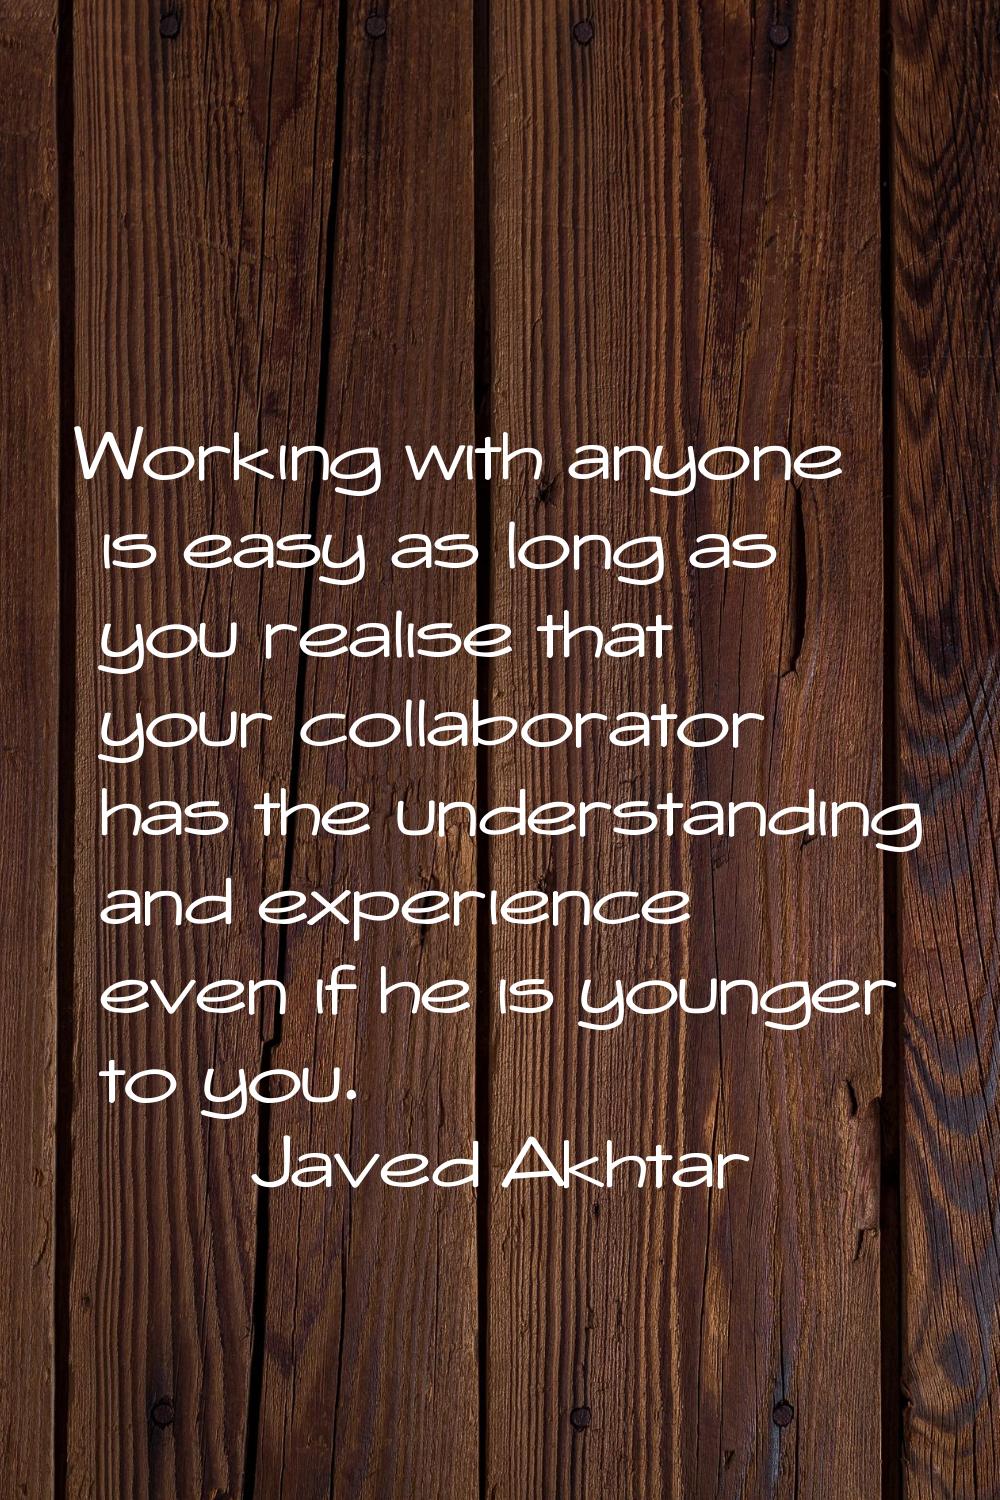 Working with anyone is easy as long as you realise that your collaborator has the understanding and